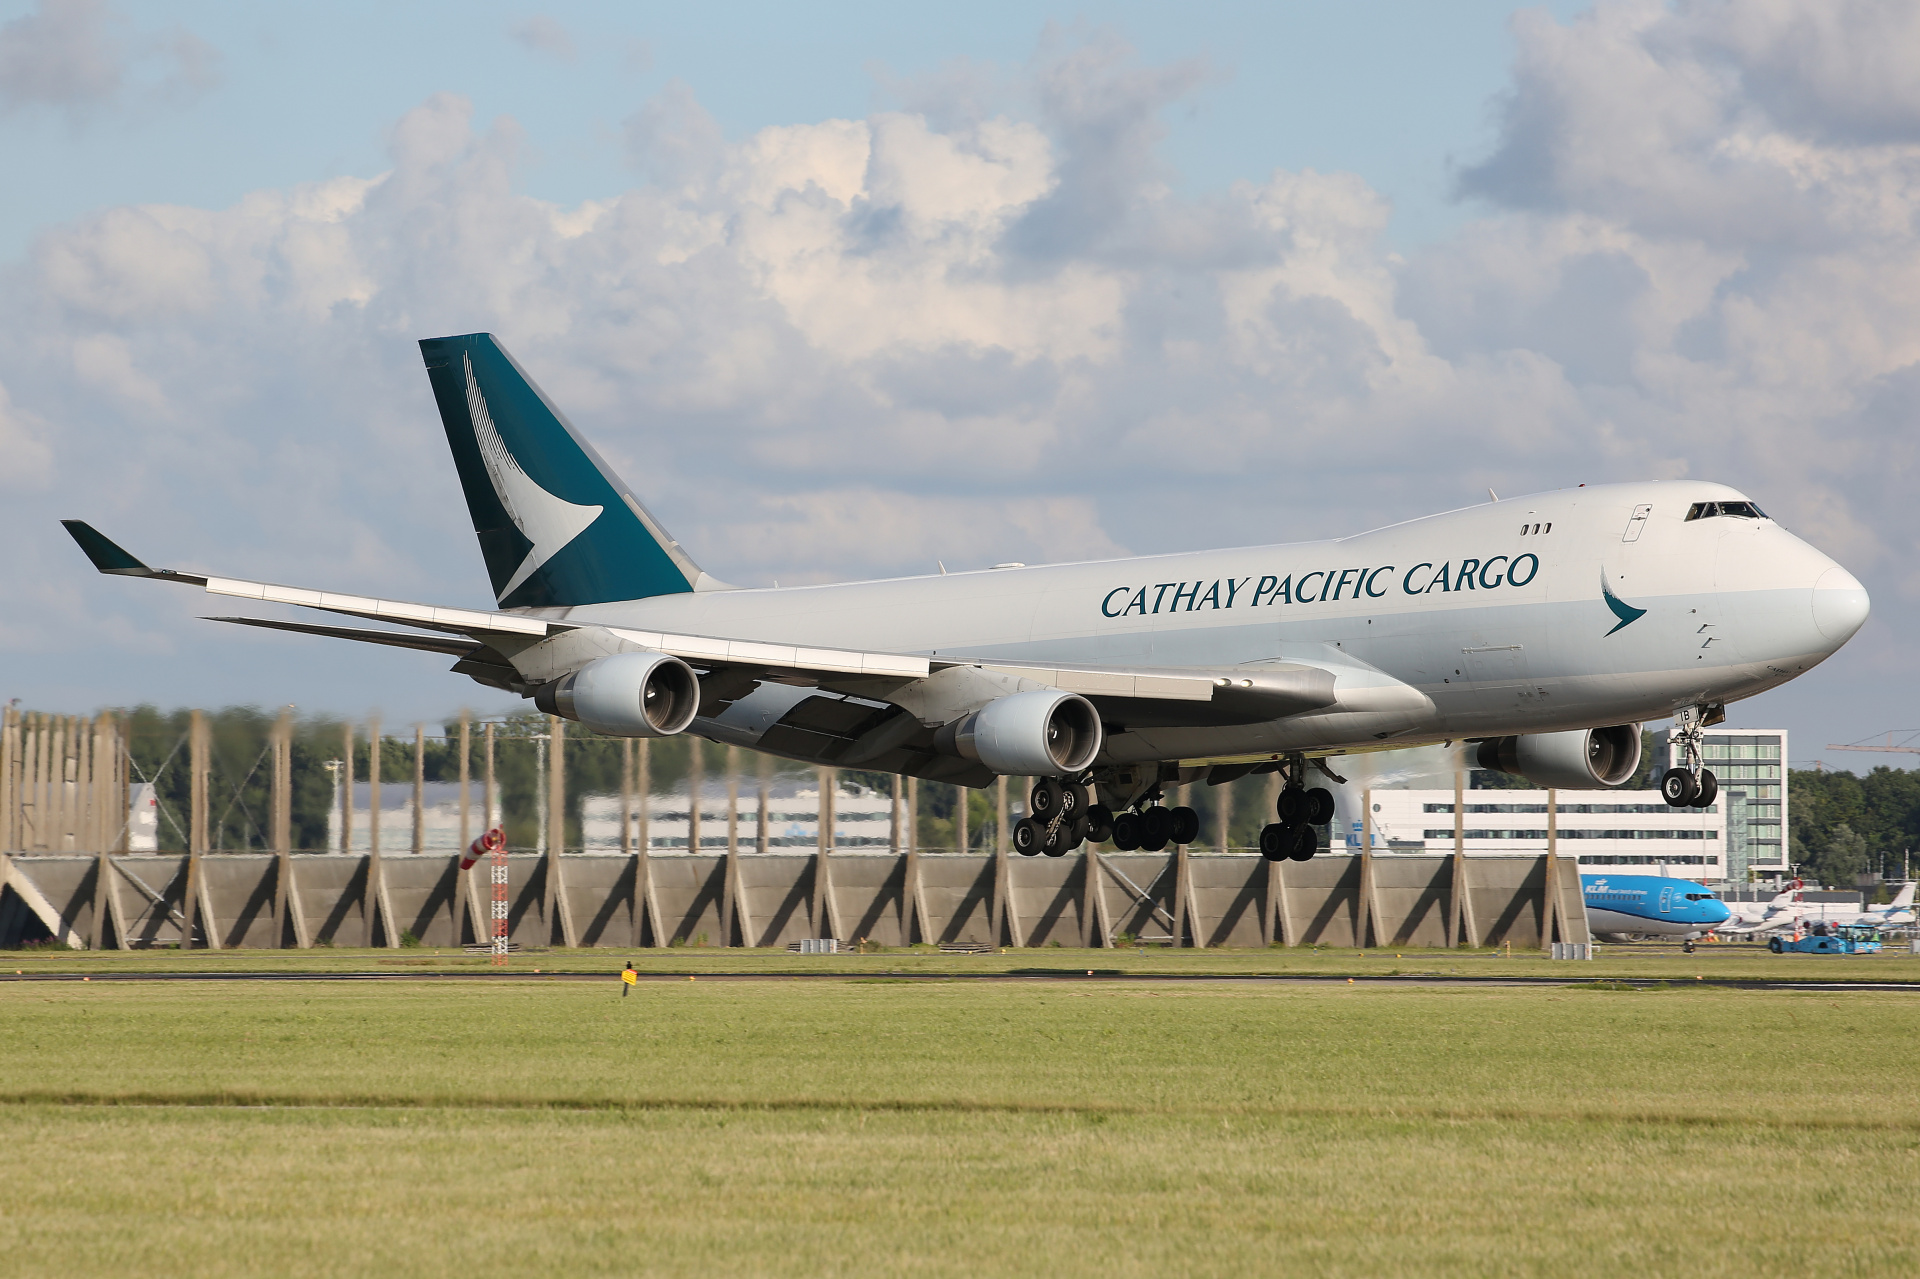 B-LIB, Cathay Pacific Cargo (Aircraft » Schiphol Spotting » Boeing 747-400F)